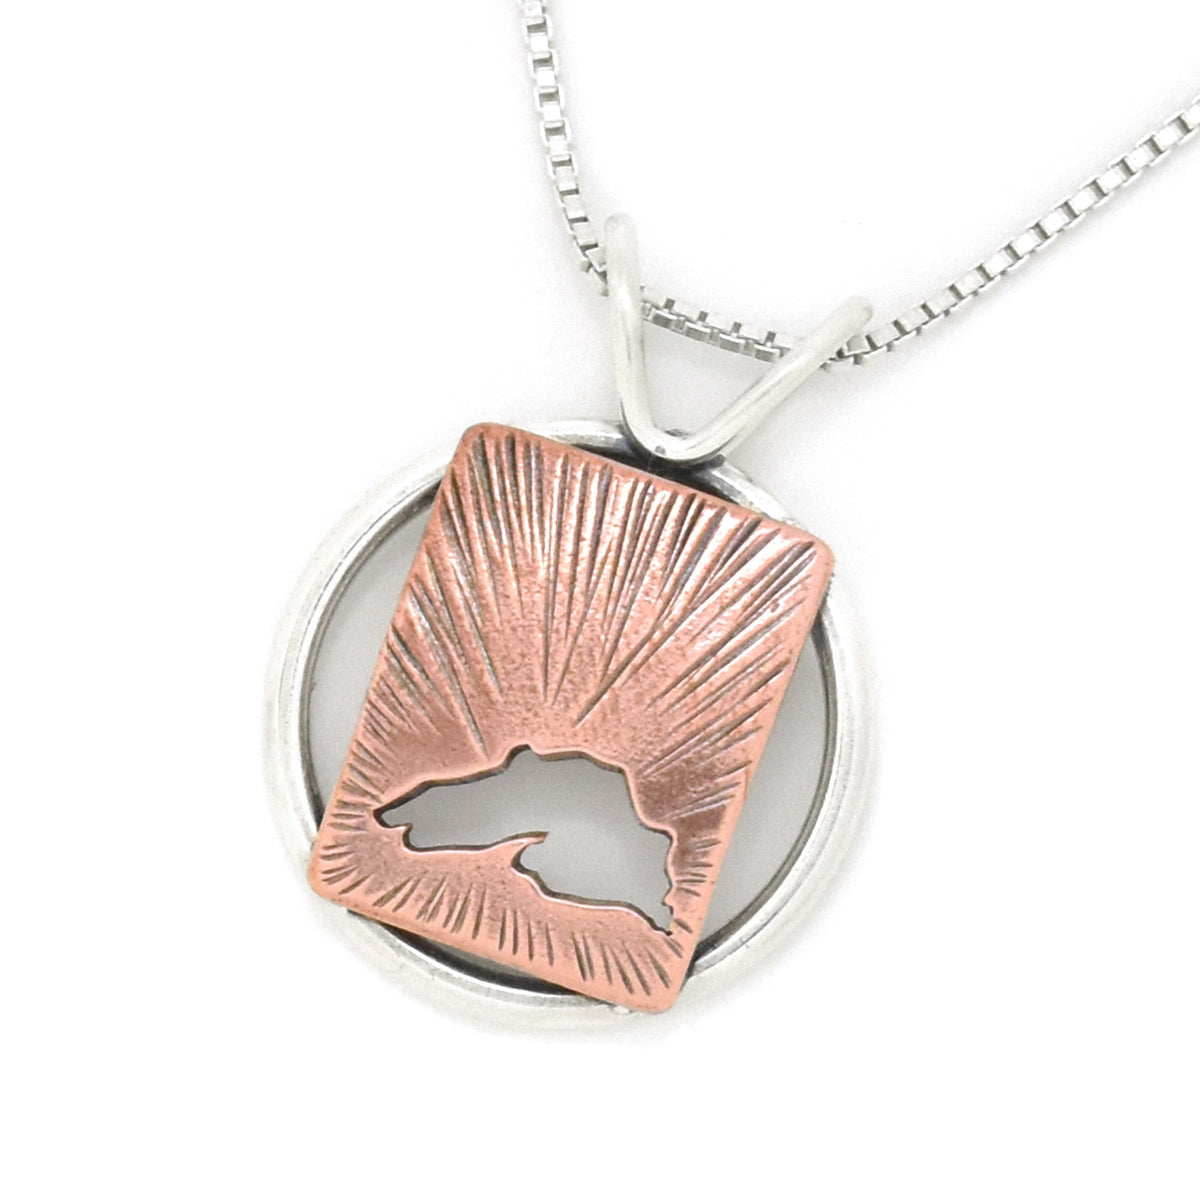 Radial Copper Lake Superior Pendant - Mixed Metal Pendant   7087 - handmade by Beth Millner Jewelry